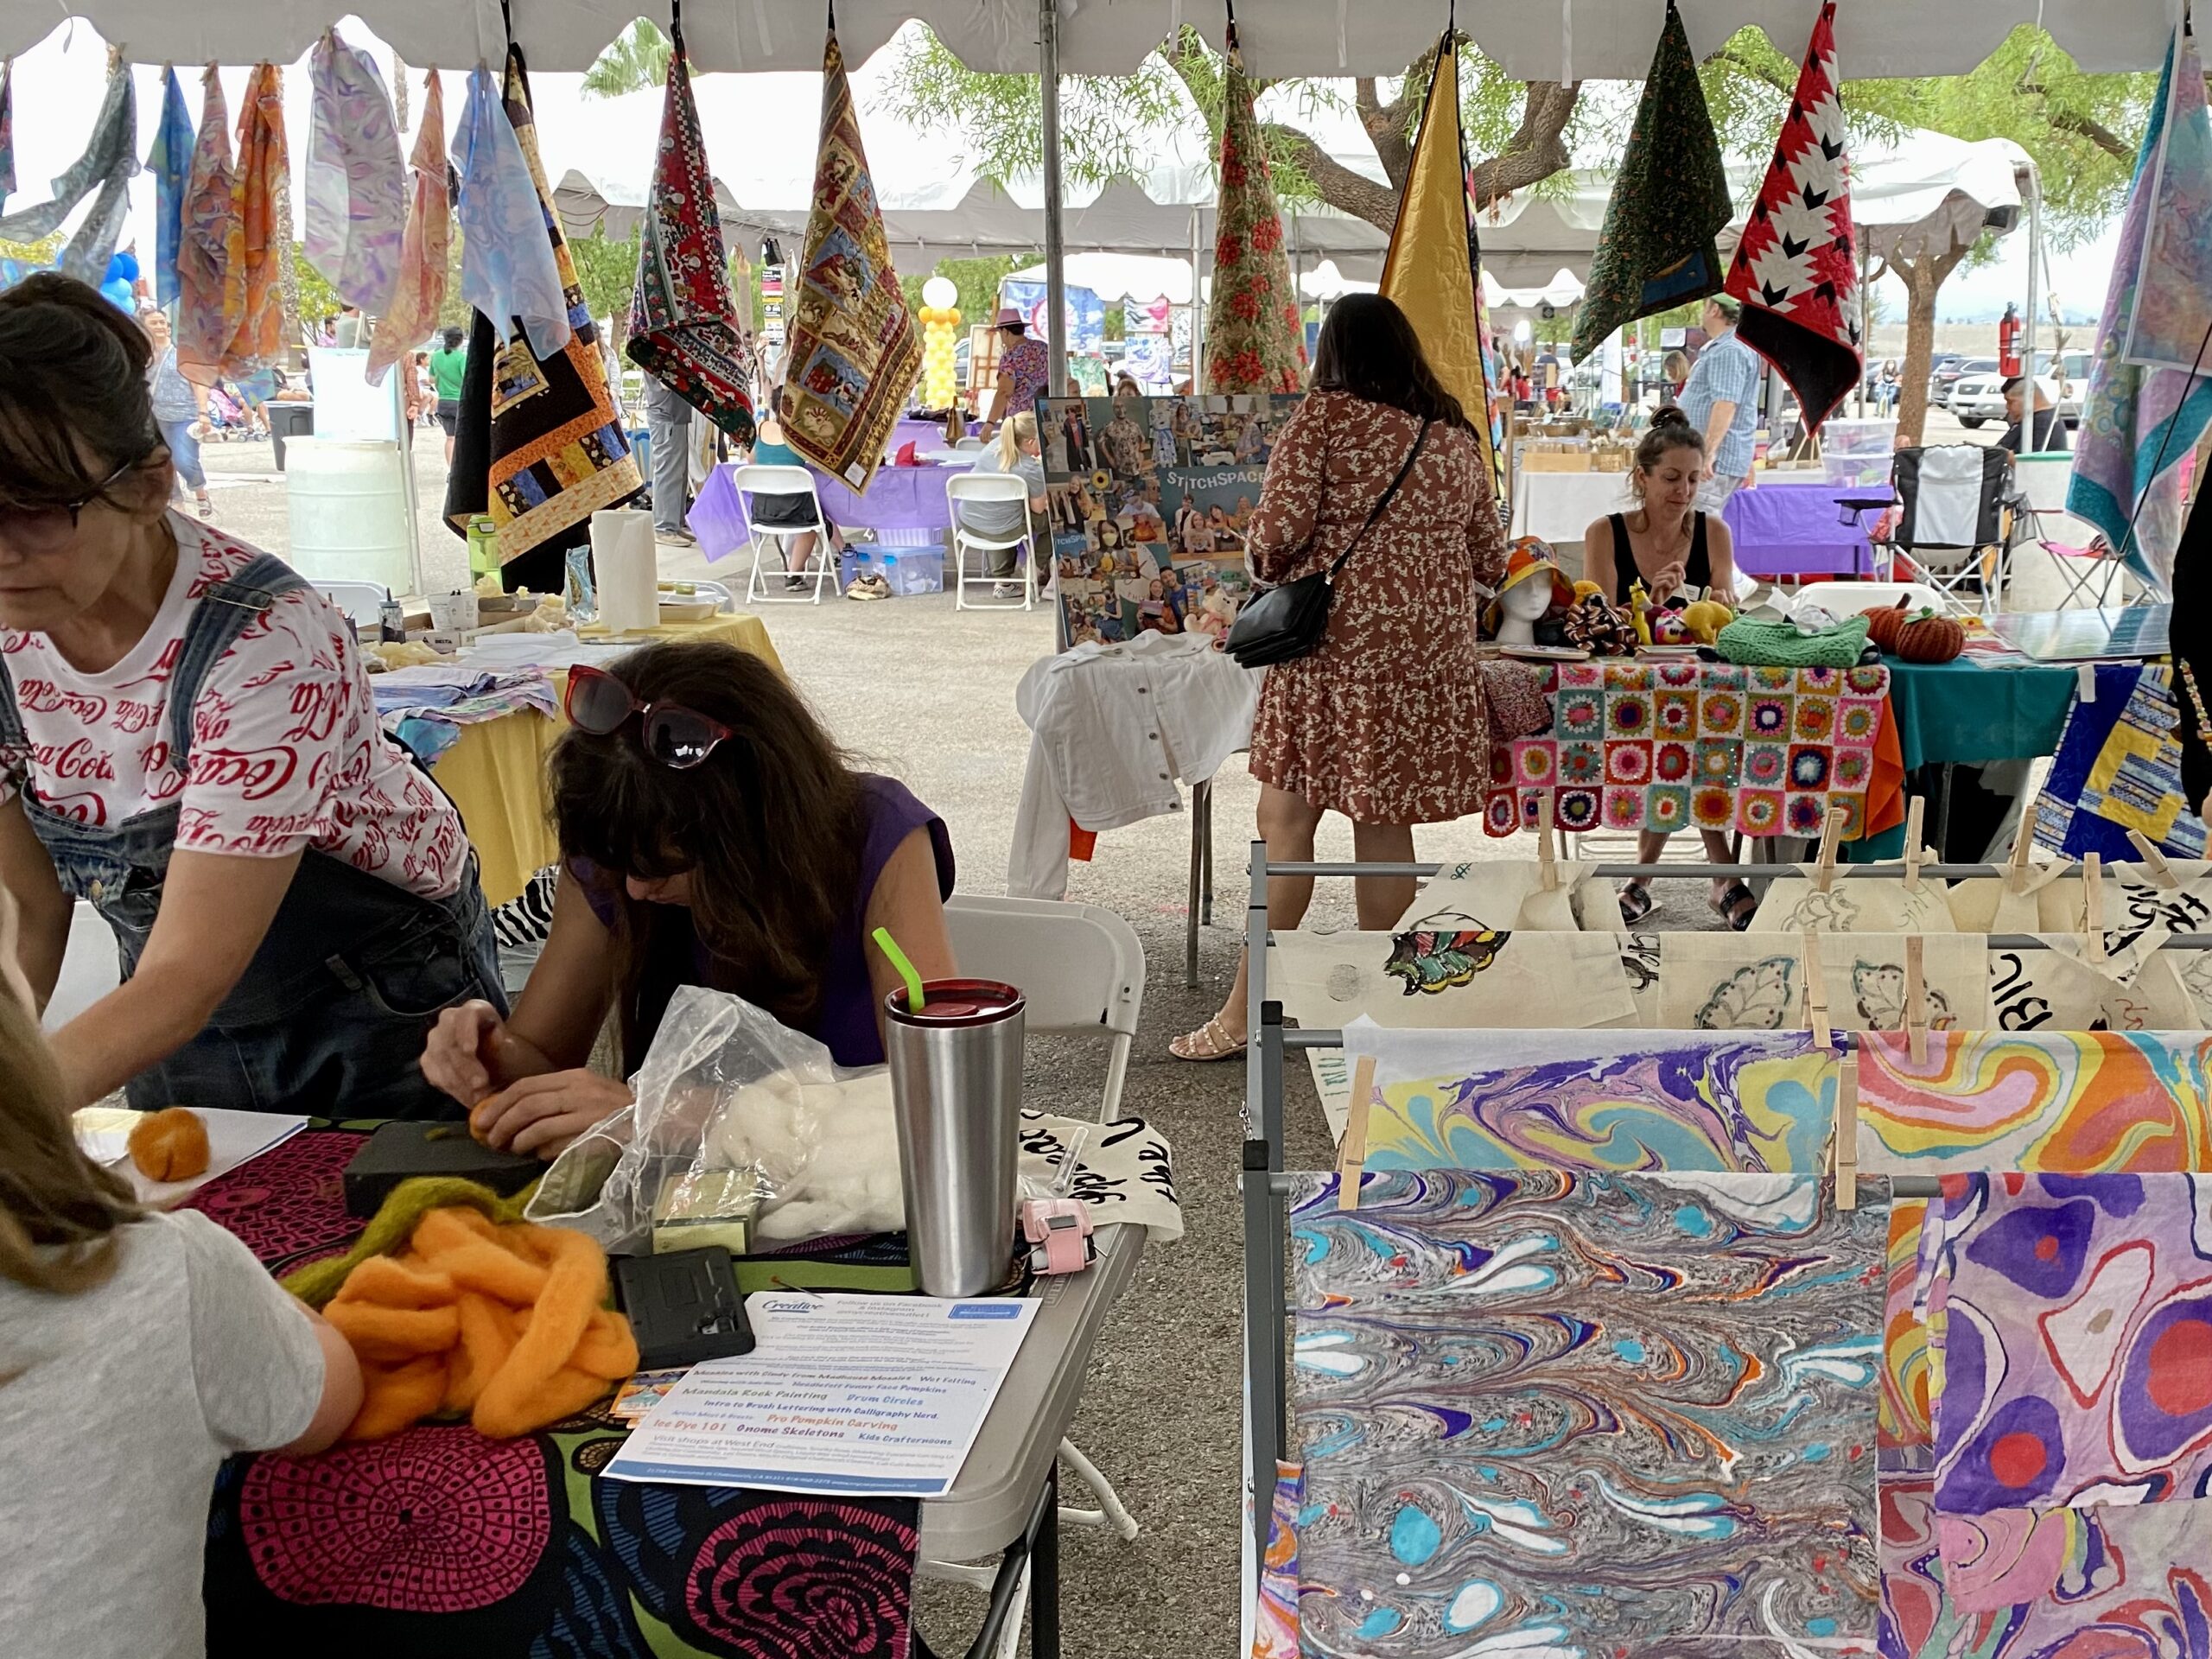 The image shows a group of people sitting at a table with flags. The accompanying text seems to be a list of creative activities or workshops, including topics like mandala rock painting, brush lettering, pumpkin carving, and kids' crafting. The image and text suggest that the event may be an outdoor marketplace or flea market featuring art and creative activities.